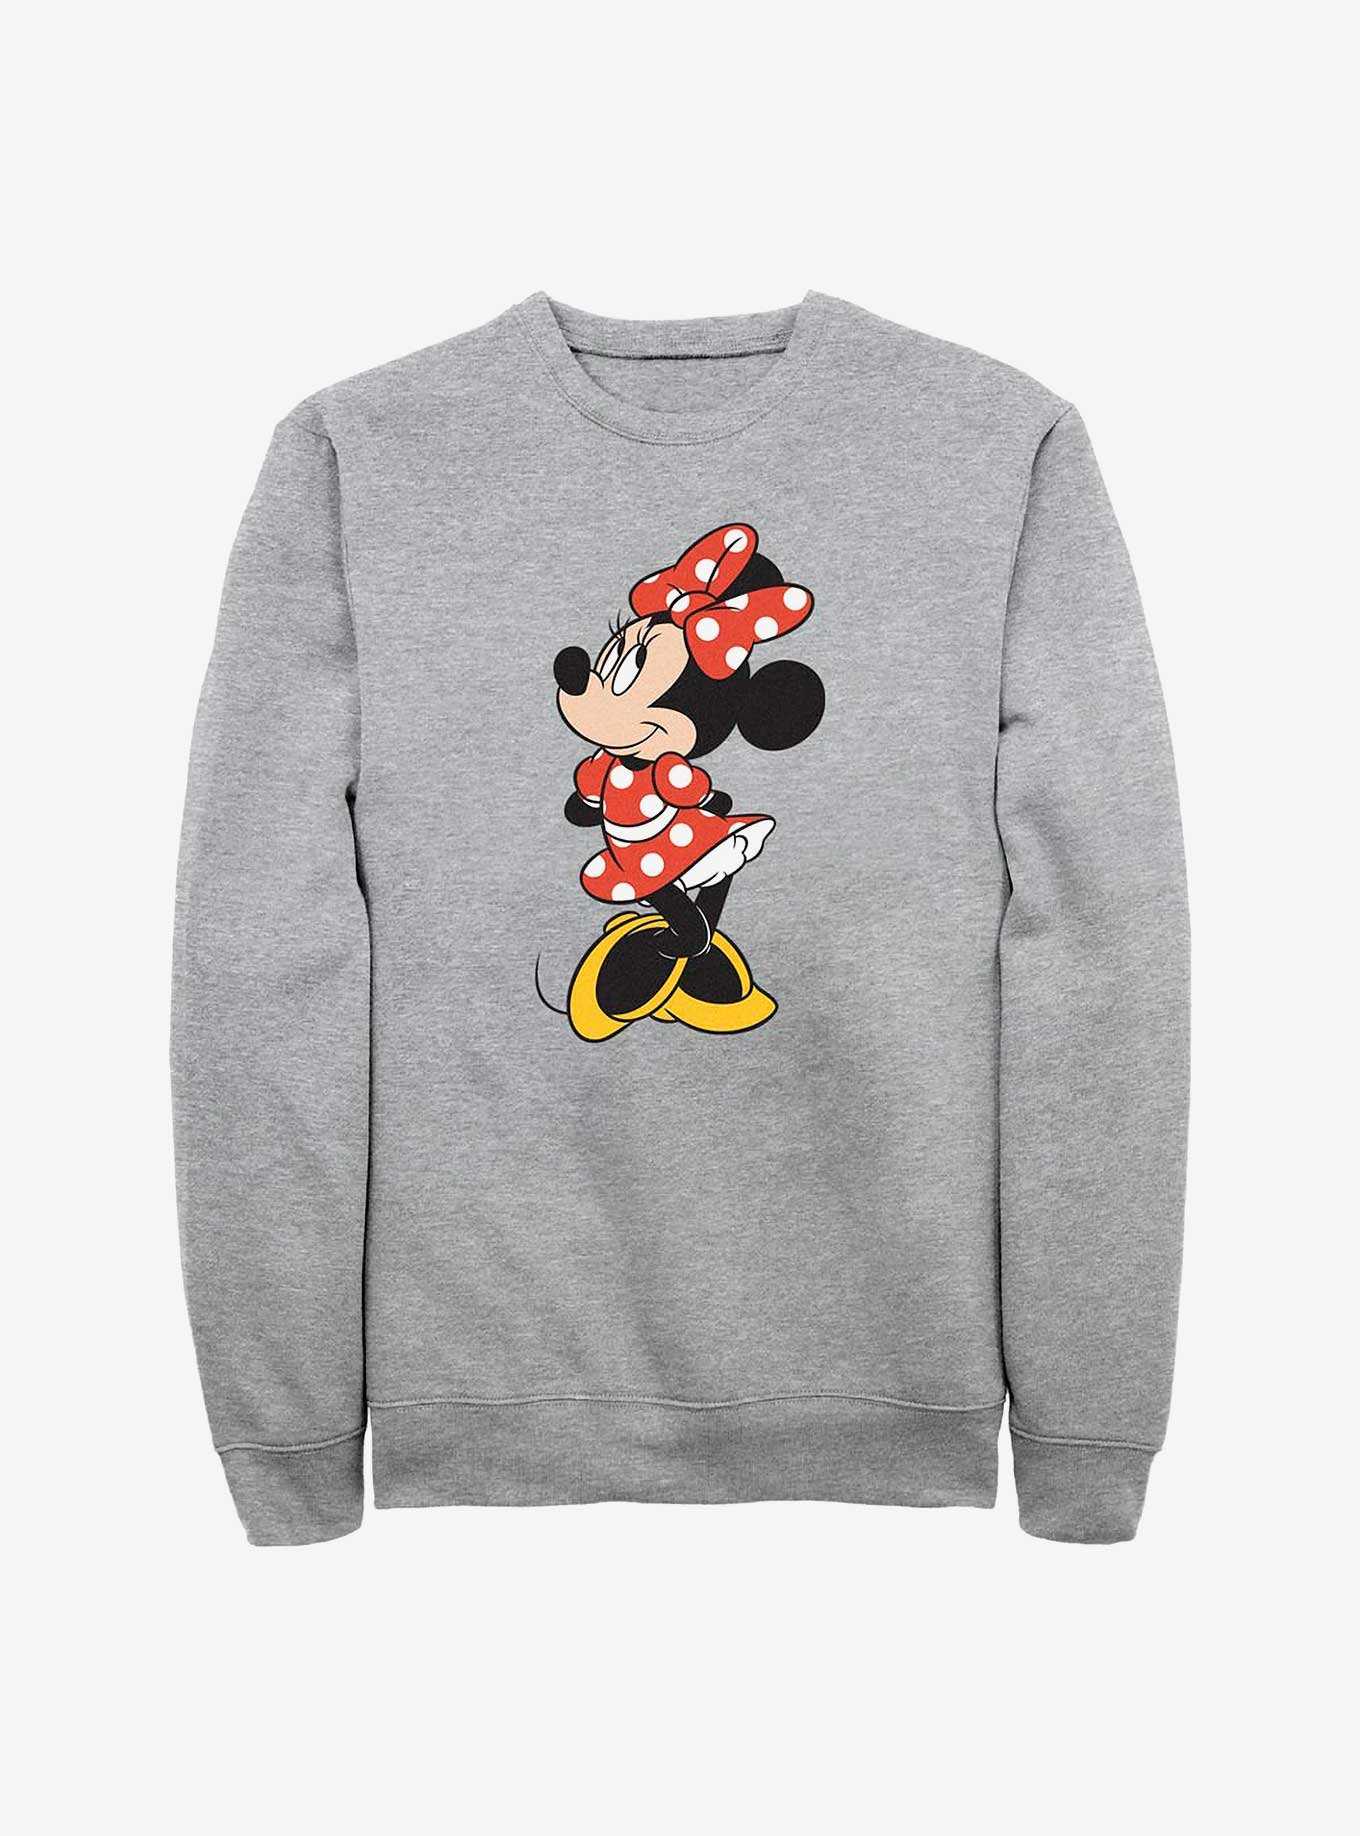 OFFICIAL Minnie Mouse & Merchandise Shirts Topic | Hot